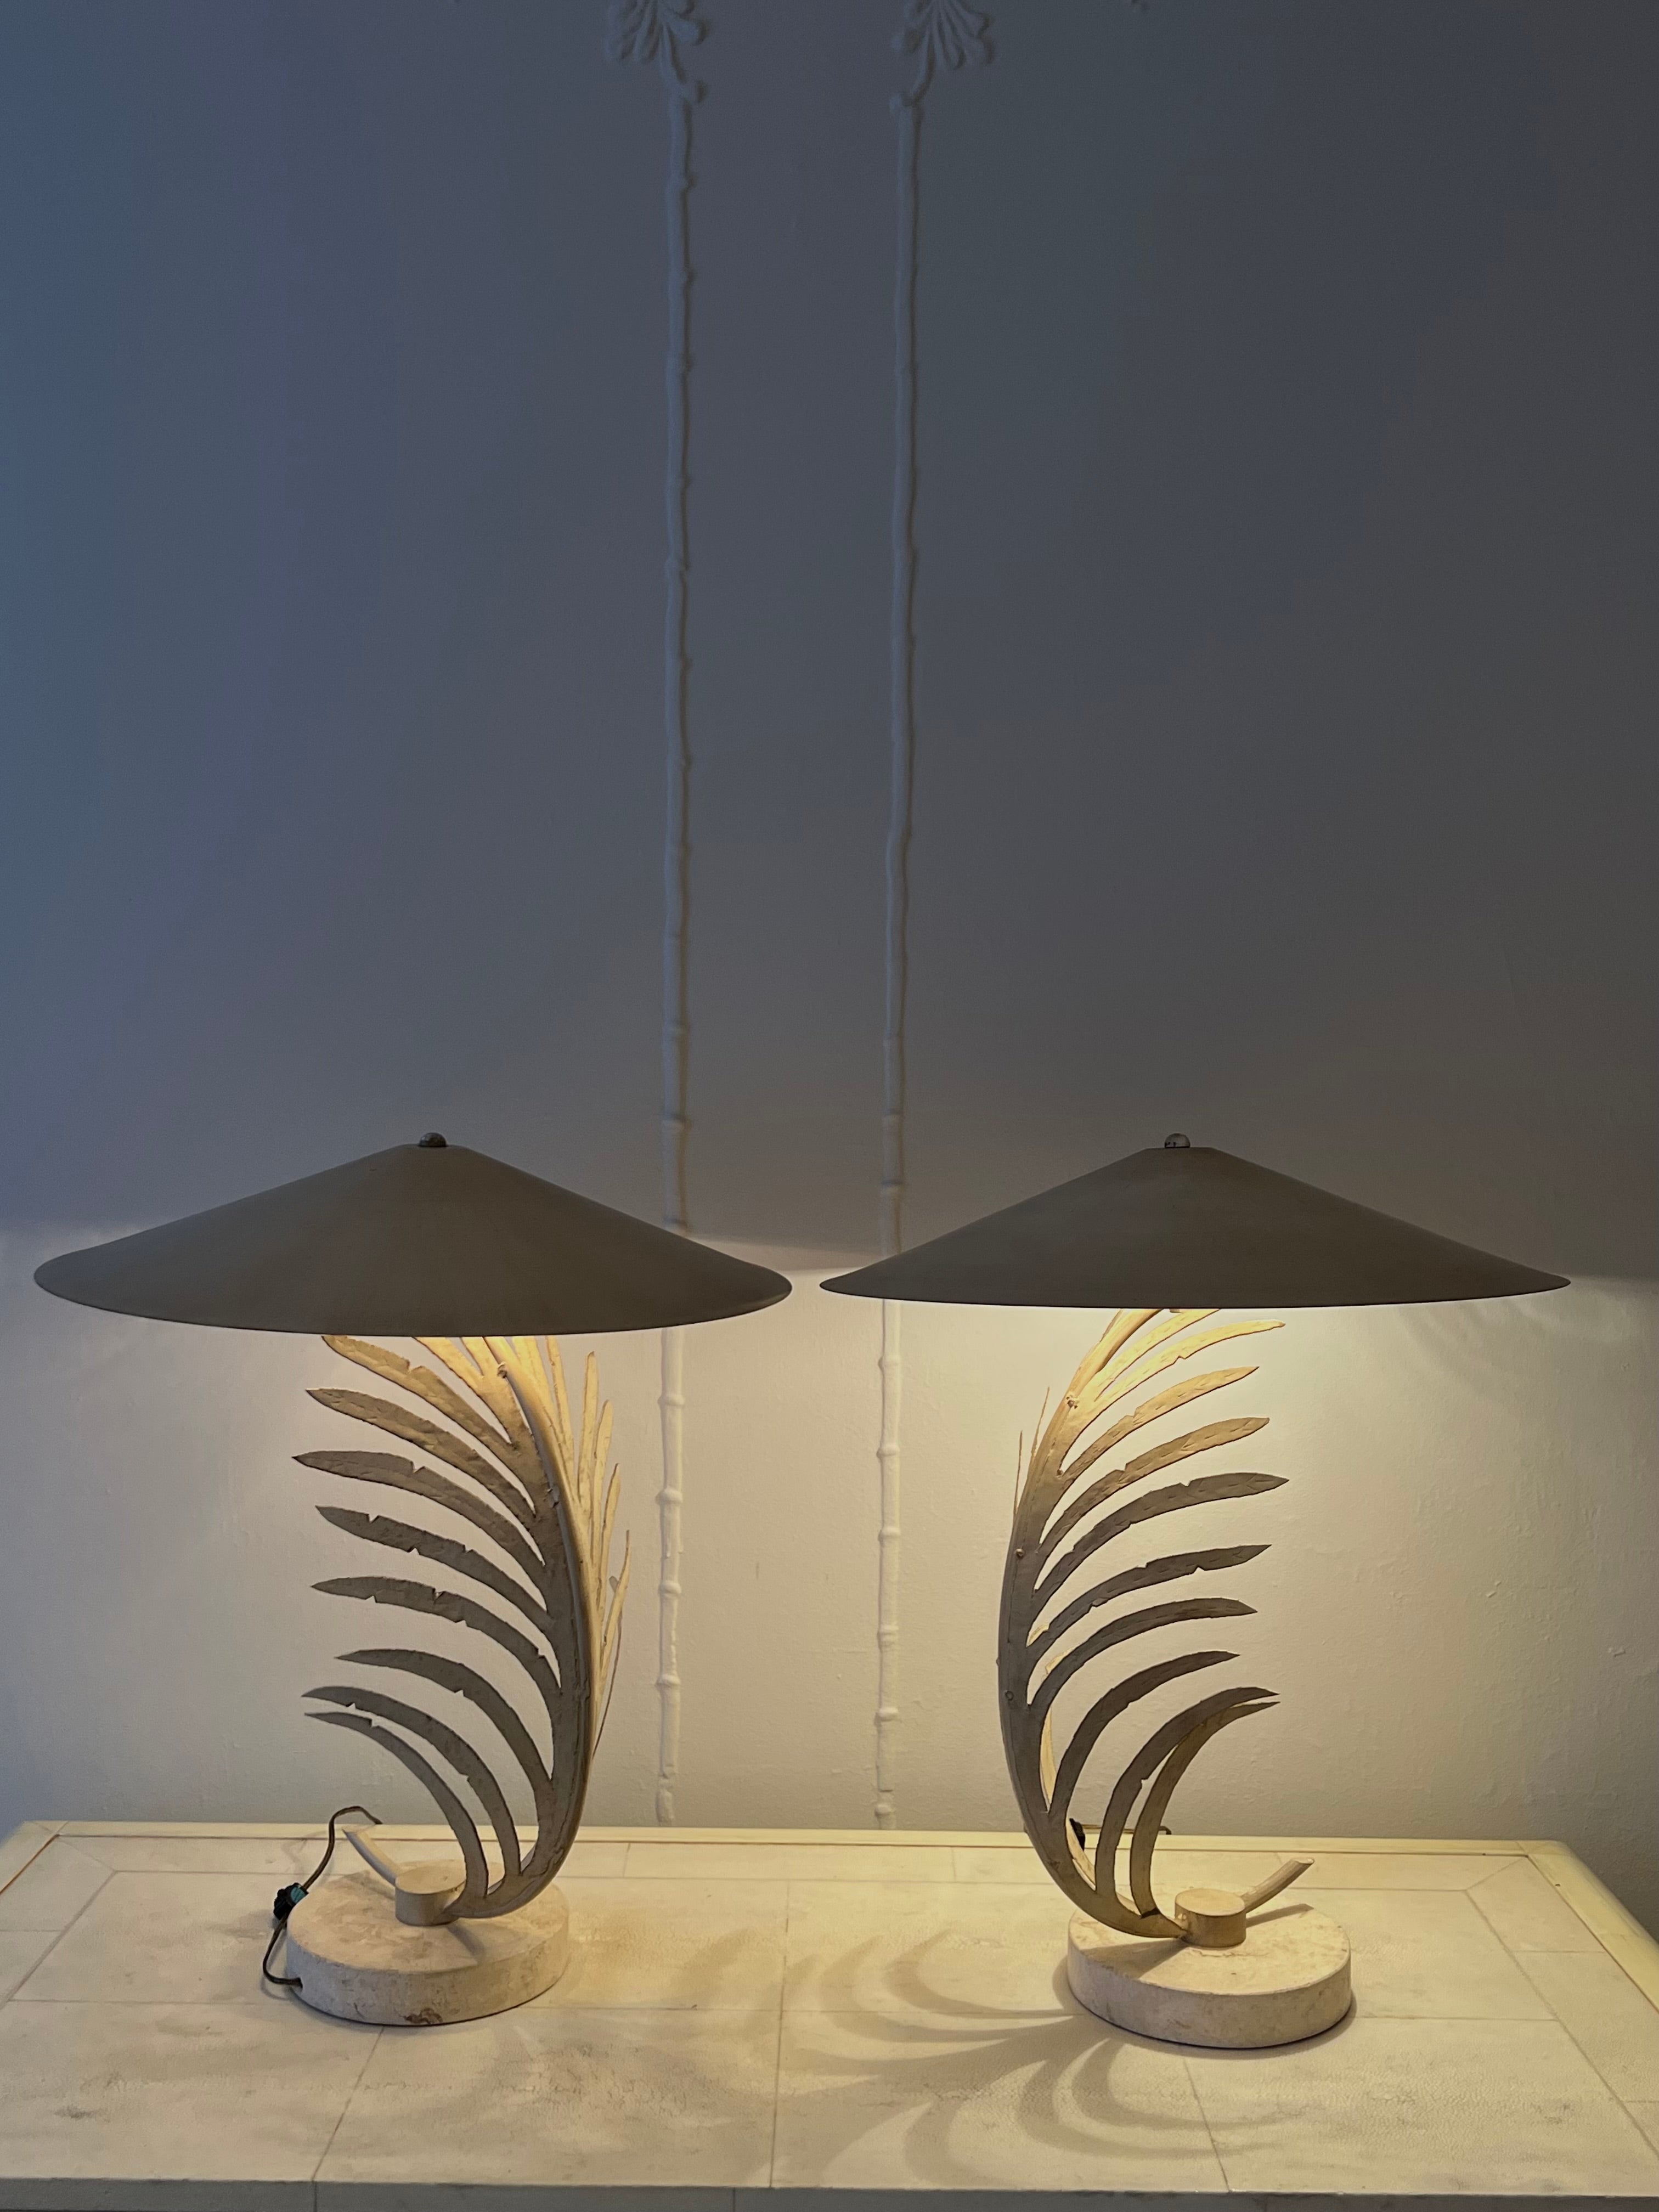 A phenomenal pair of Michael Taylor lamps in whitewashed bamboo finish and original pyramid style metal shades. The lamps include 3-way switch for your dimming preference.